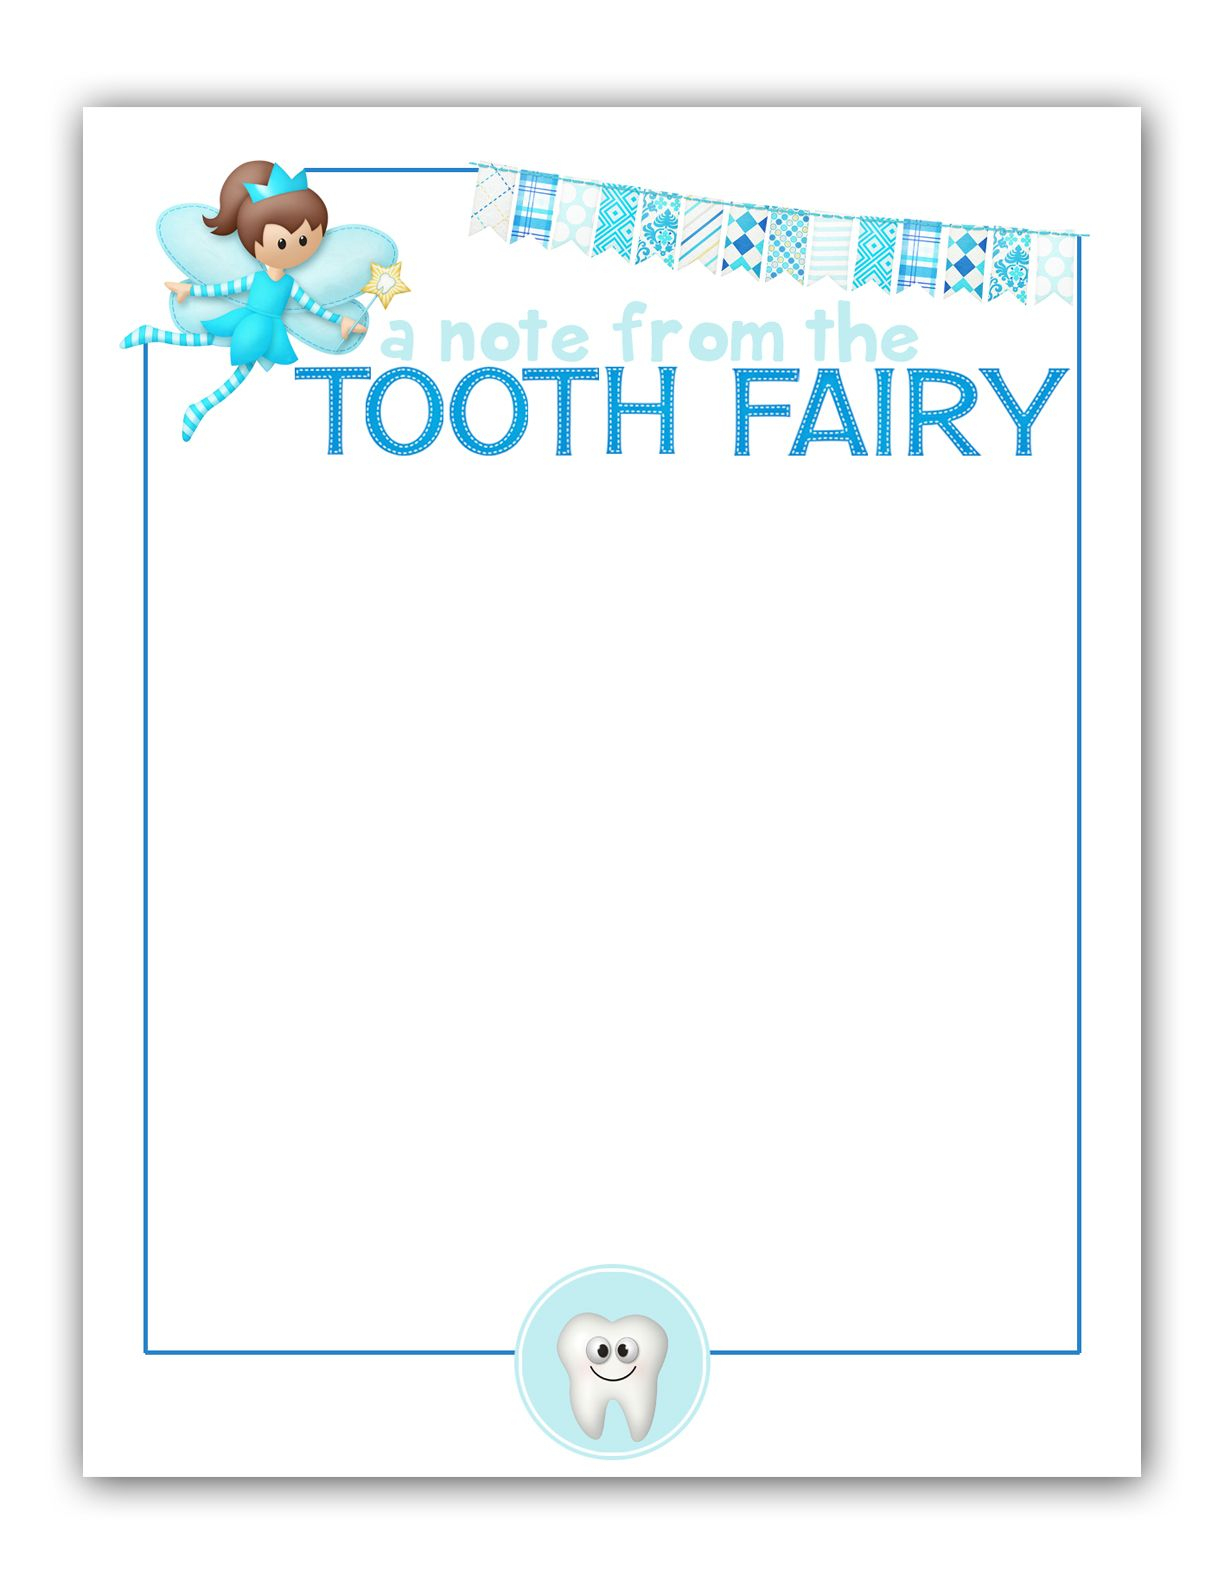 M|K Designs Blog: Tooth Fairy Stationary - Free Printable | Tooth - Free Printable Tooth Fairy Pictures